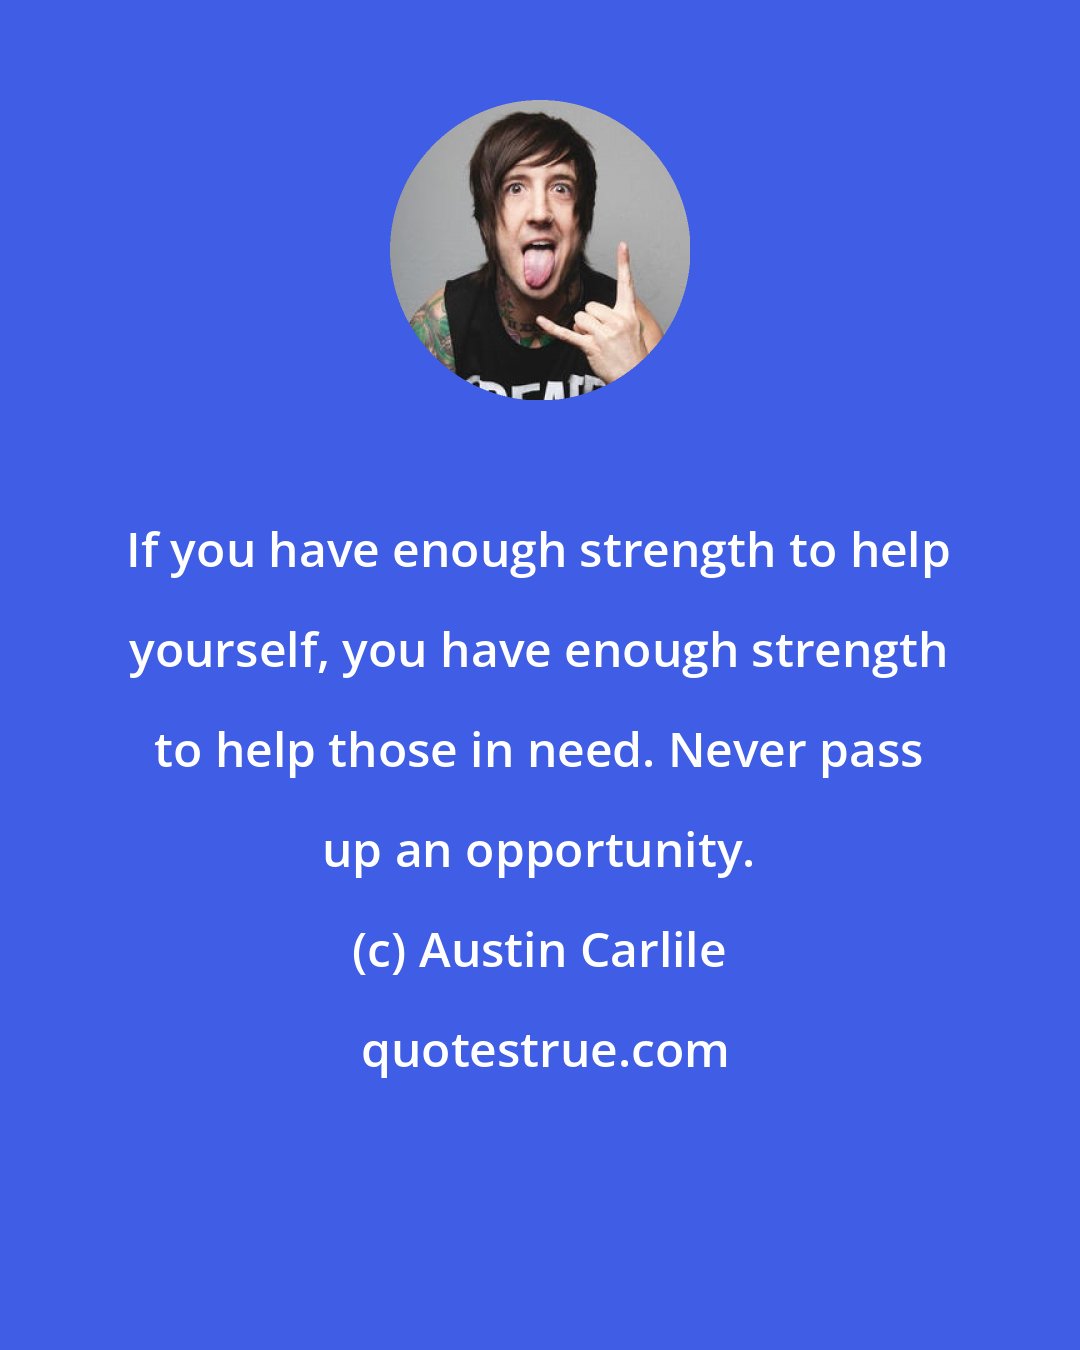 Austin Carlile: If you have enough strength to help yourself, you have enough strength to help those in need. Never pass up an opportunity.